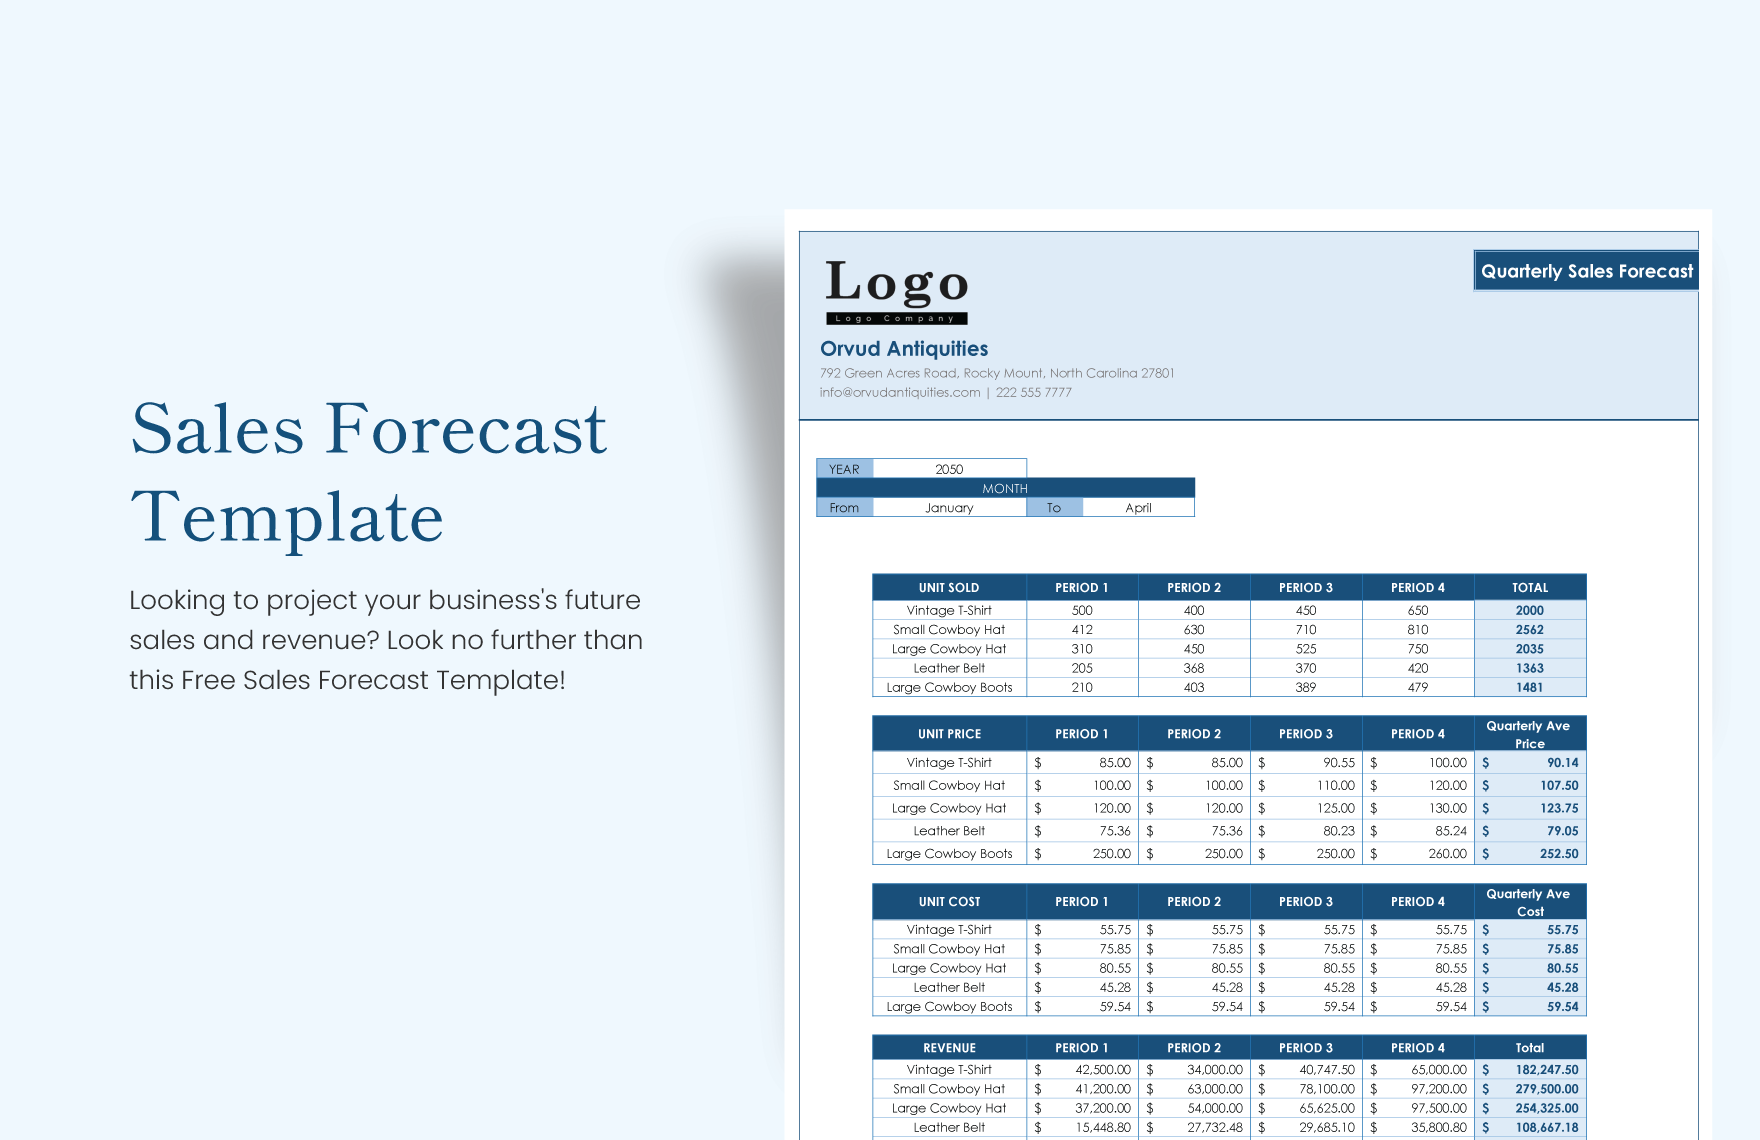 Sales Forecast Template in Excel, Google Sheets